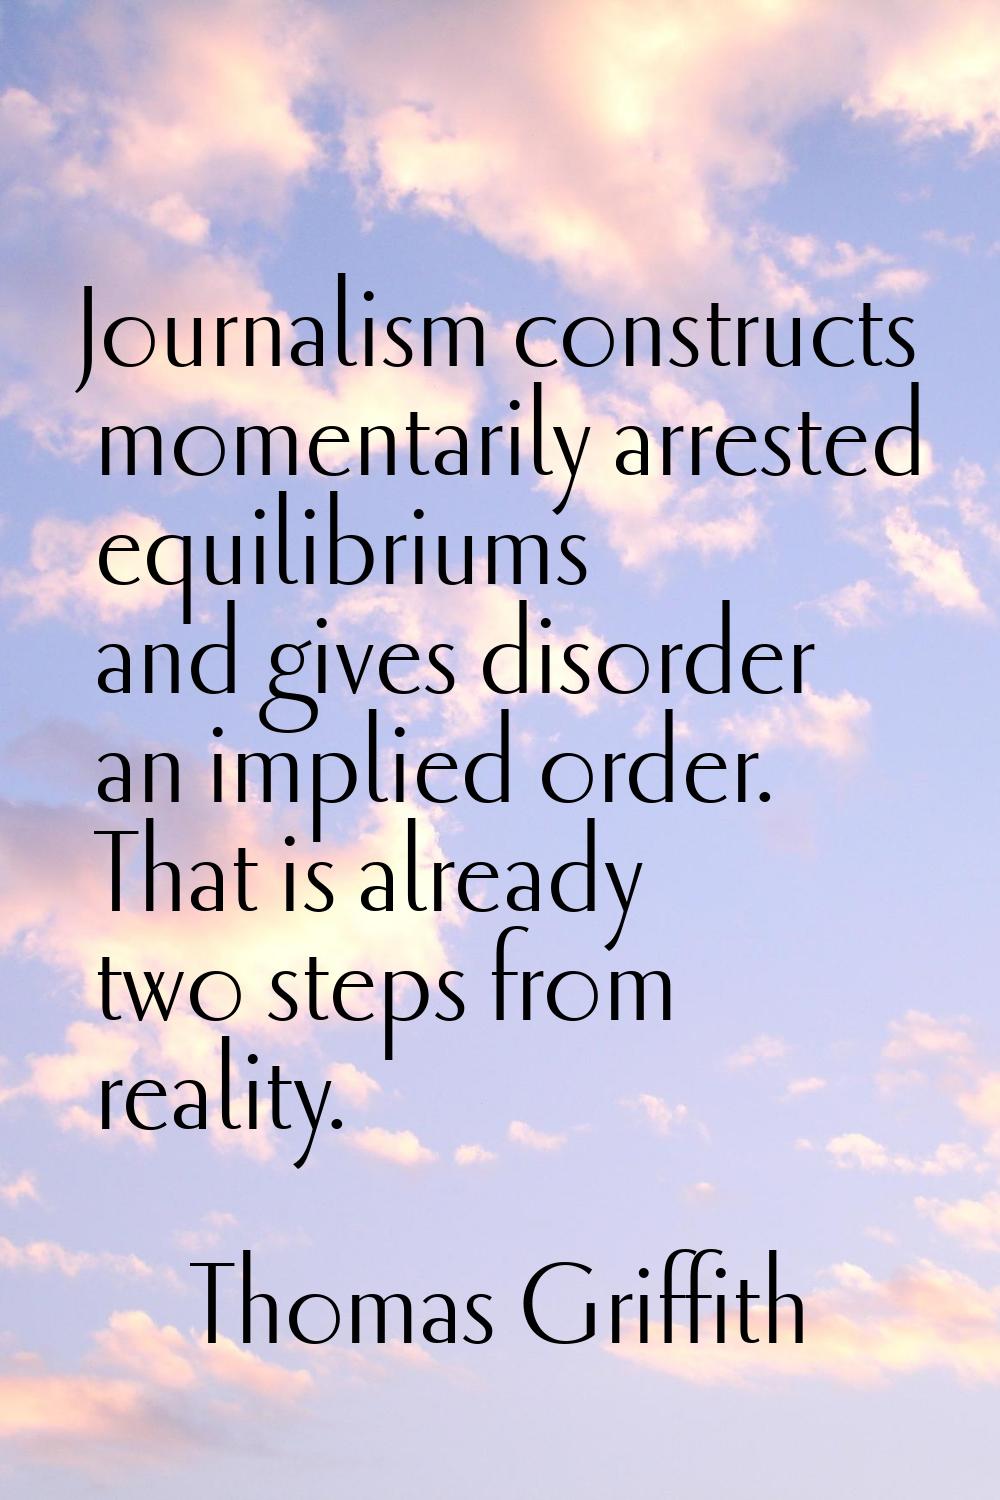 Journalism constructs momentarily arrested equilibriums and gives disorder an implied order. That i